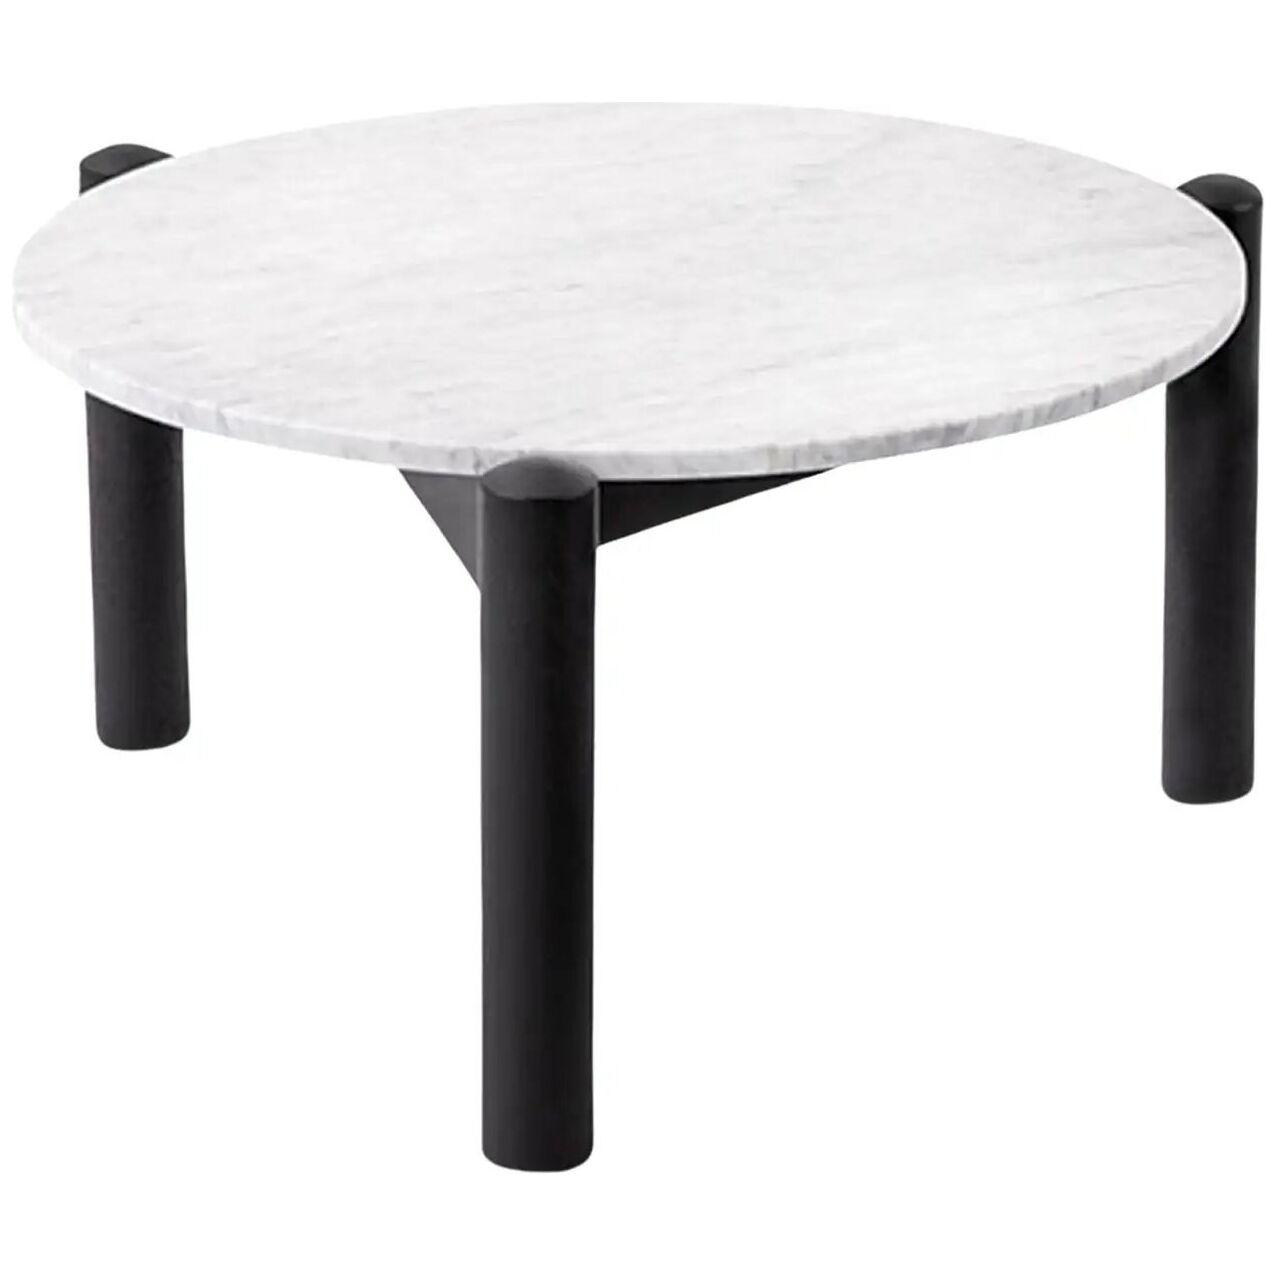 Table À Plateau Interchangeable, by Charlotte Perriand for Cassina